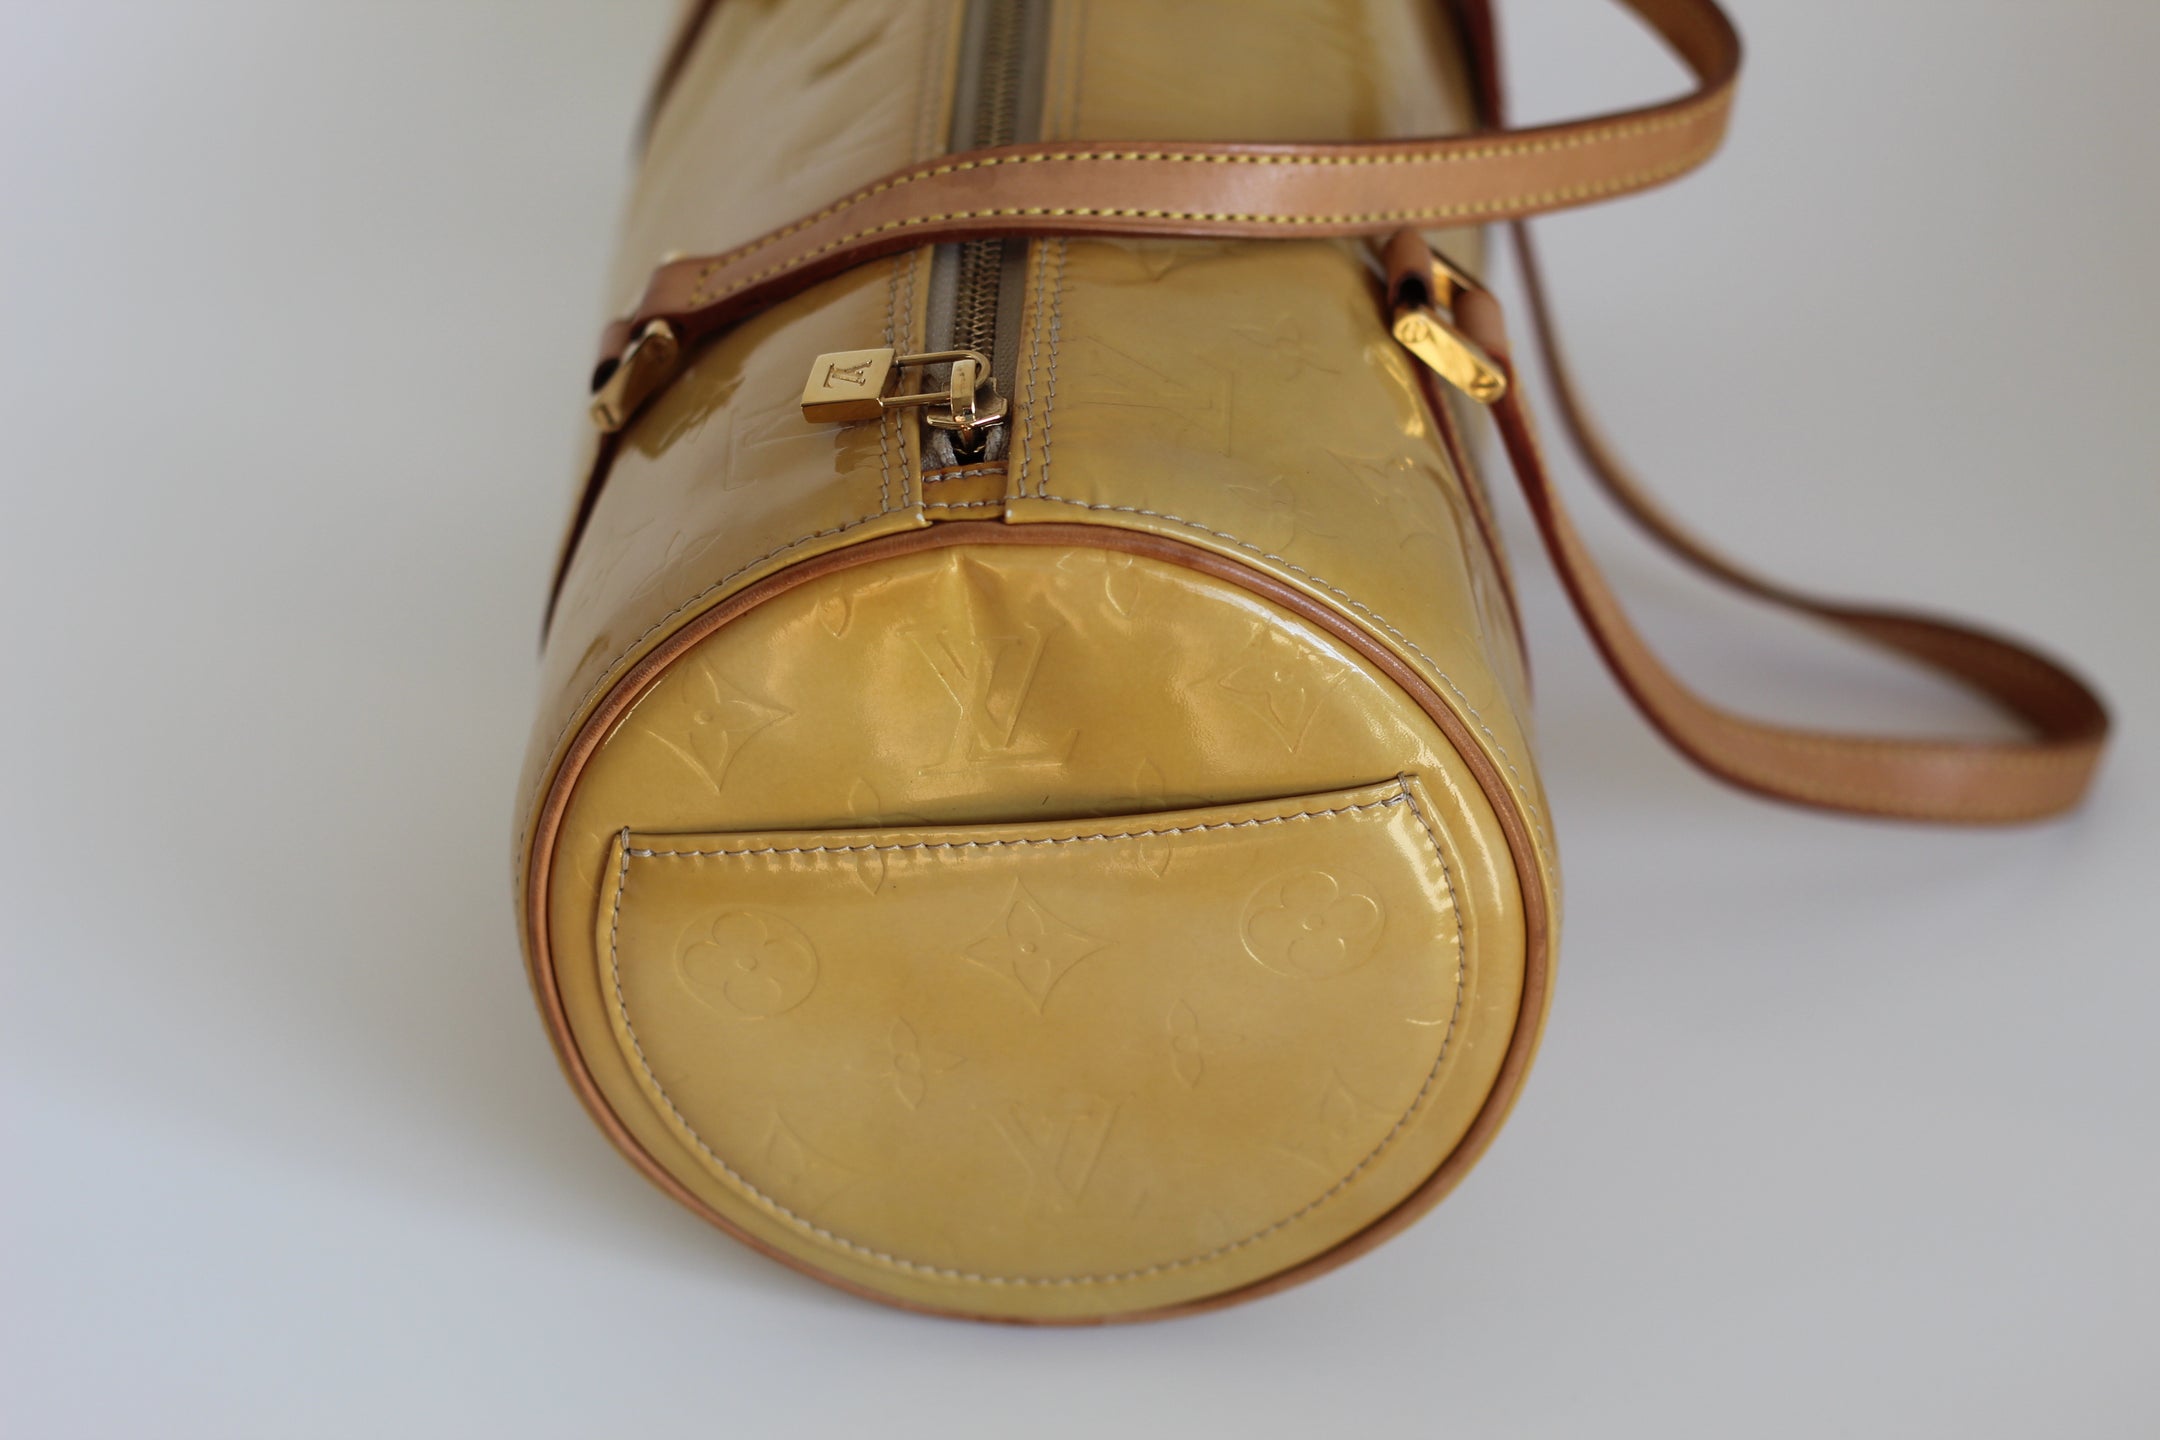 Louis Vuitton Bedford Papillon Bag in Vernis Patent Leather Yellow